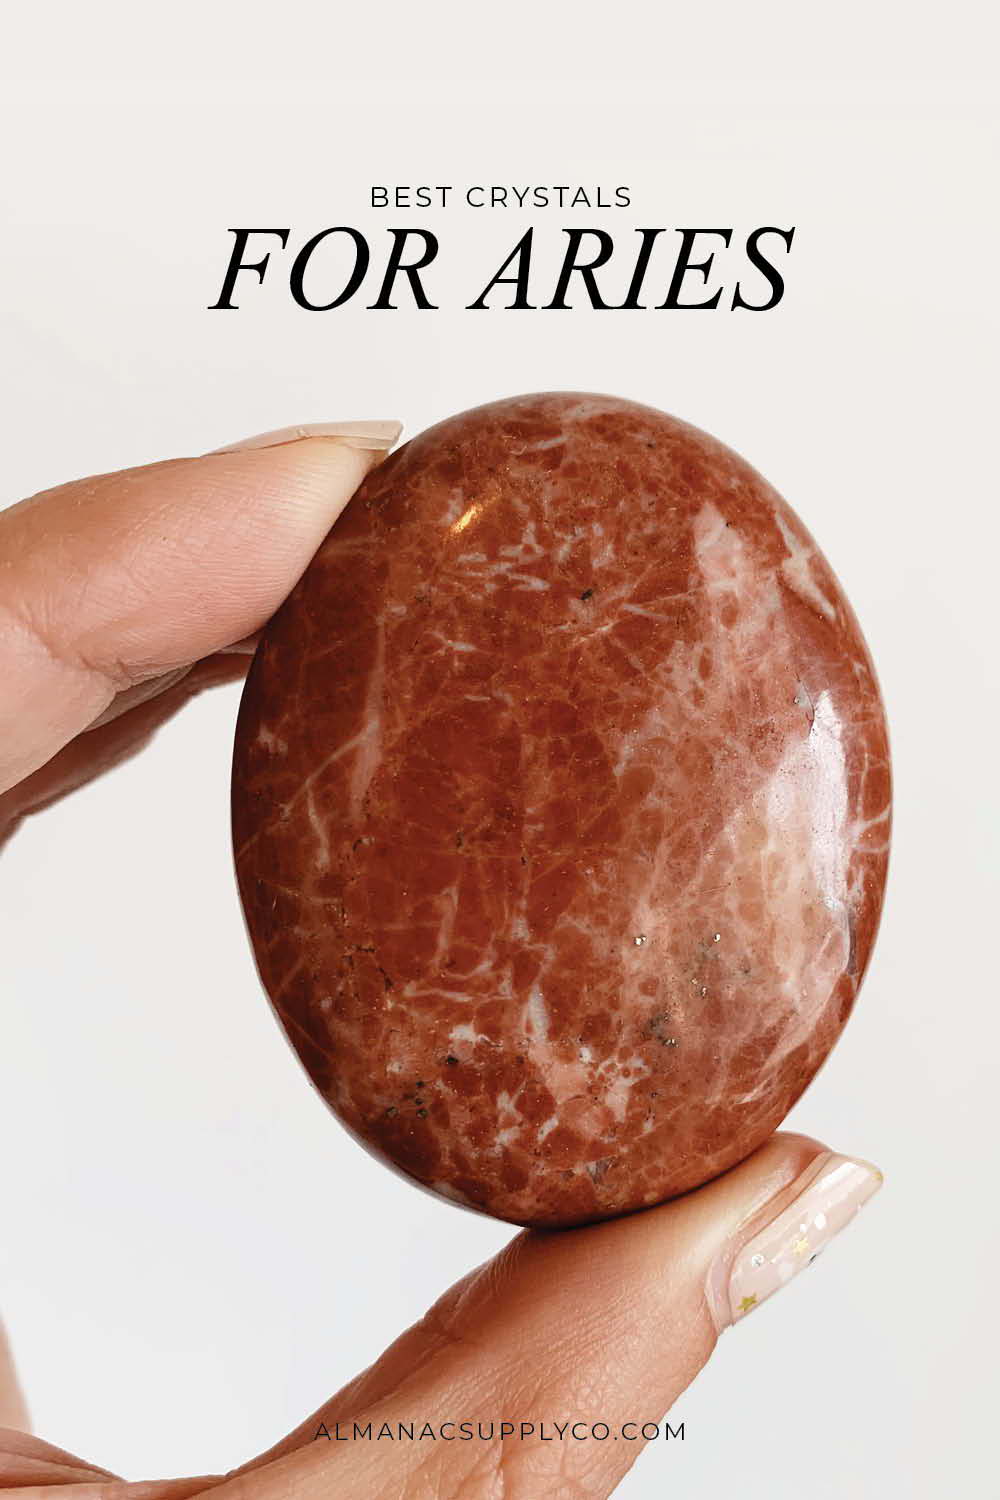 The Best Crystals for Aries - Red Jasper Palm Stone